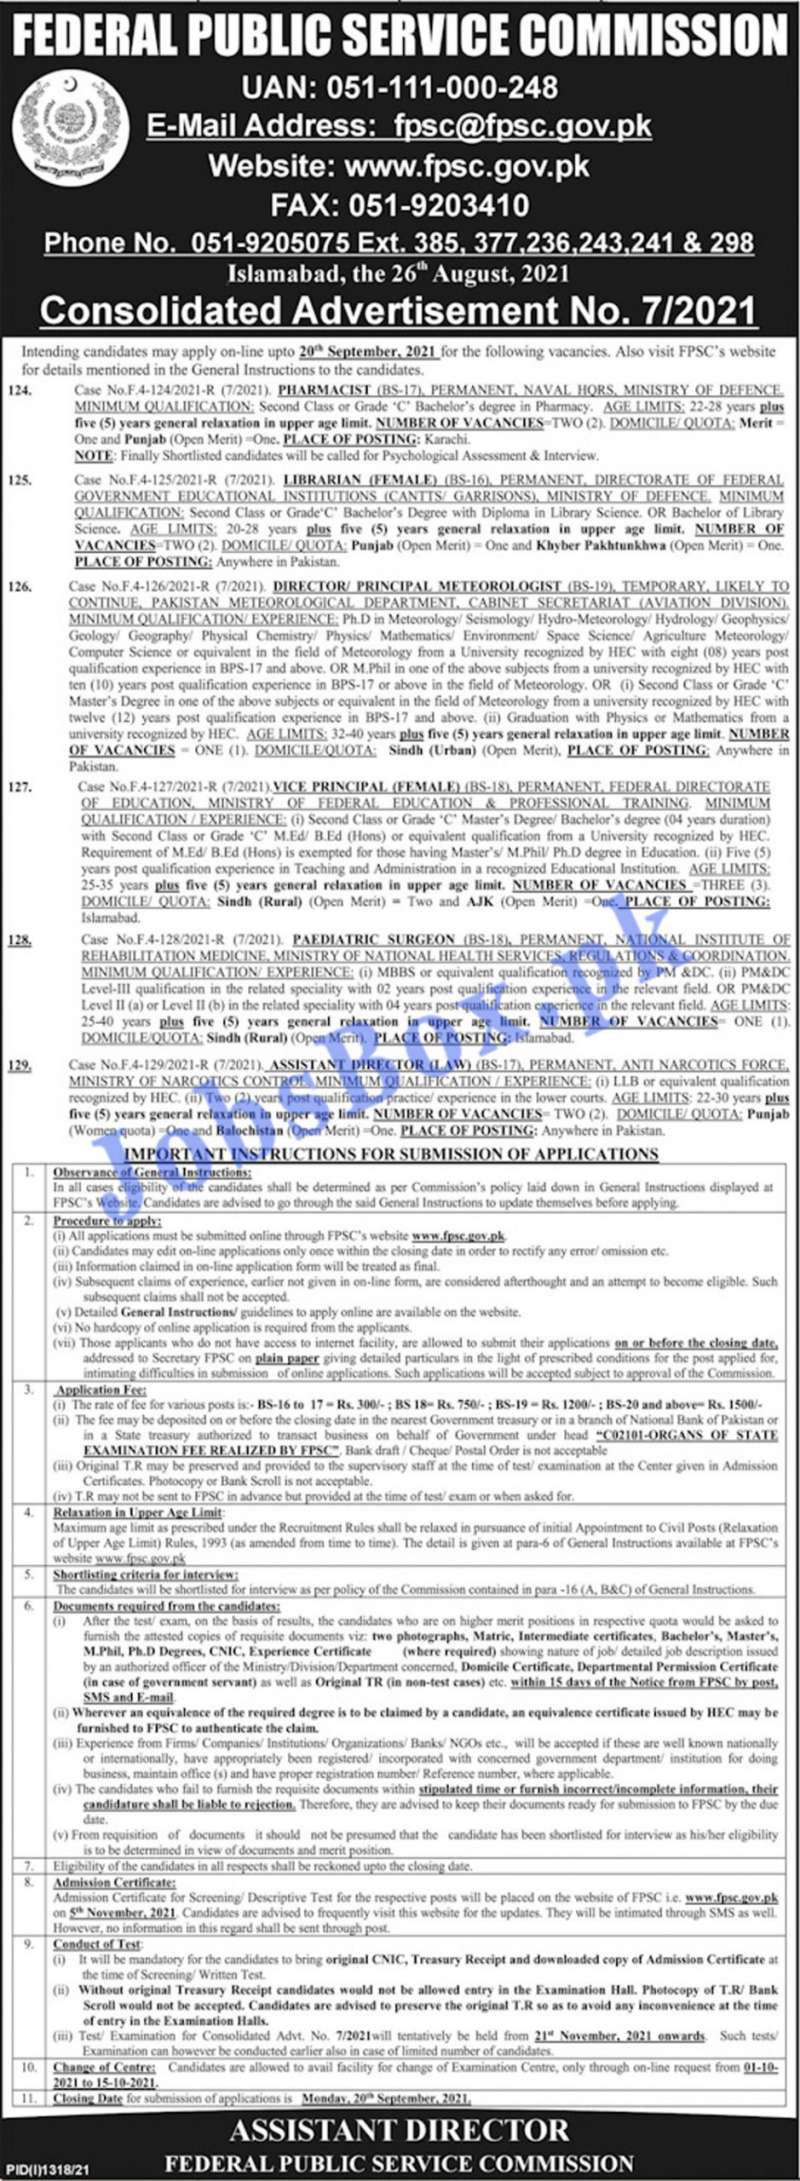 Federal Public Service Commission FPSC Islamabad Jobs 2021